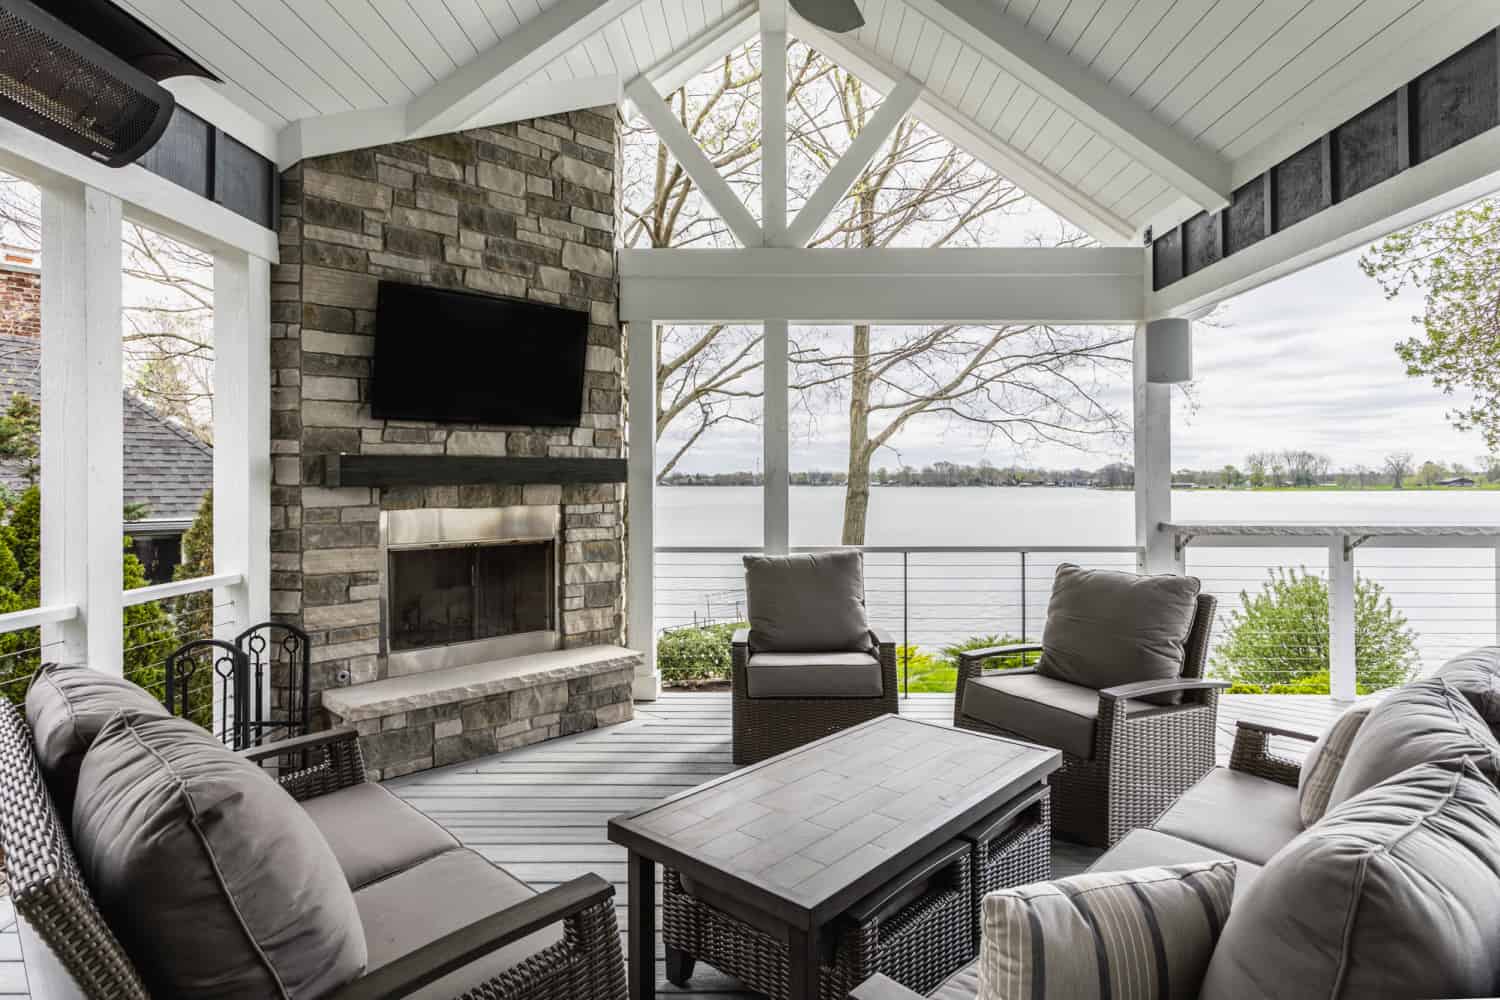 Nicholas Design Build | Description (modified): A remodeled screened in porch with furniture and a fireplace.